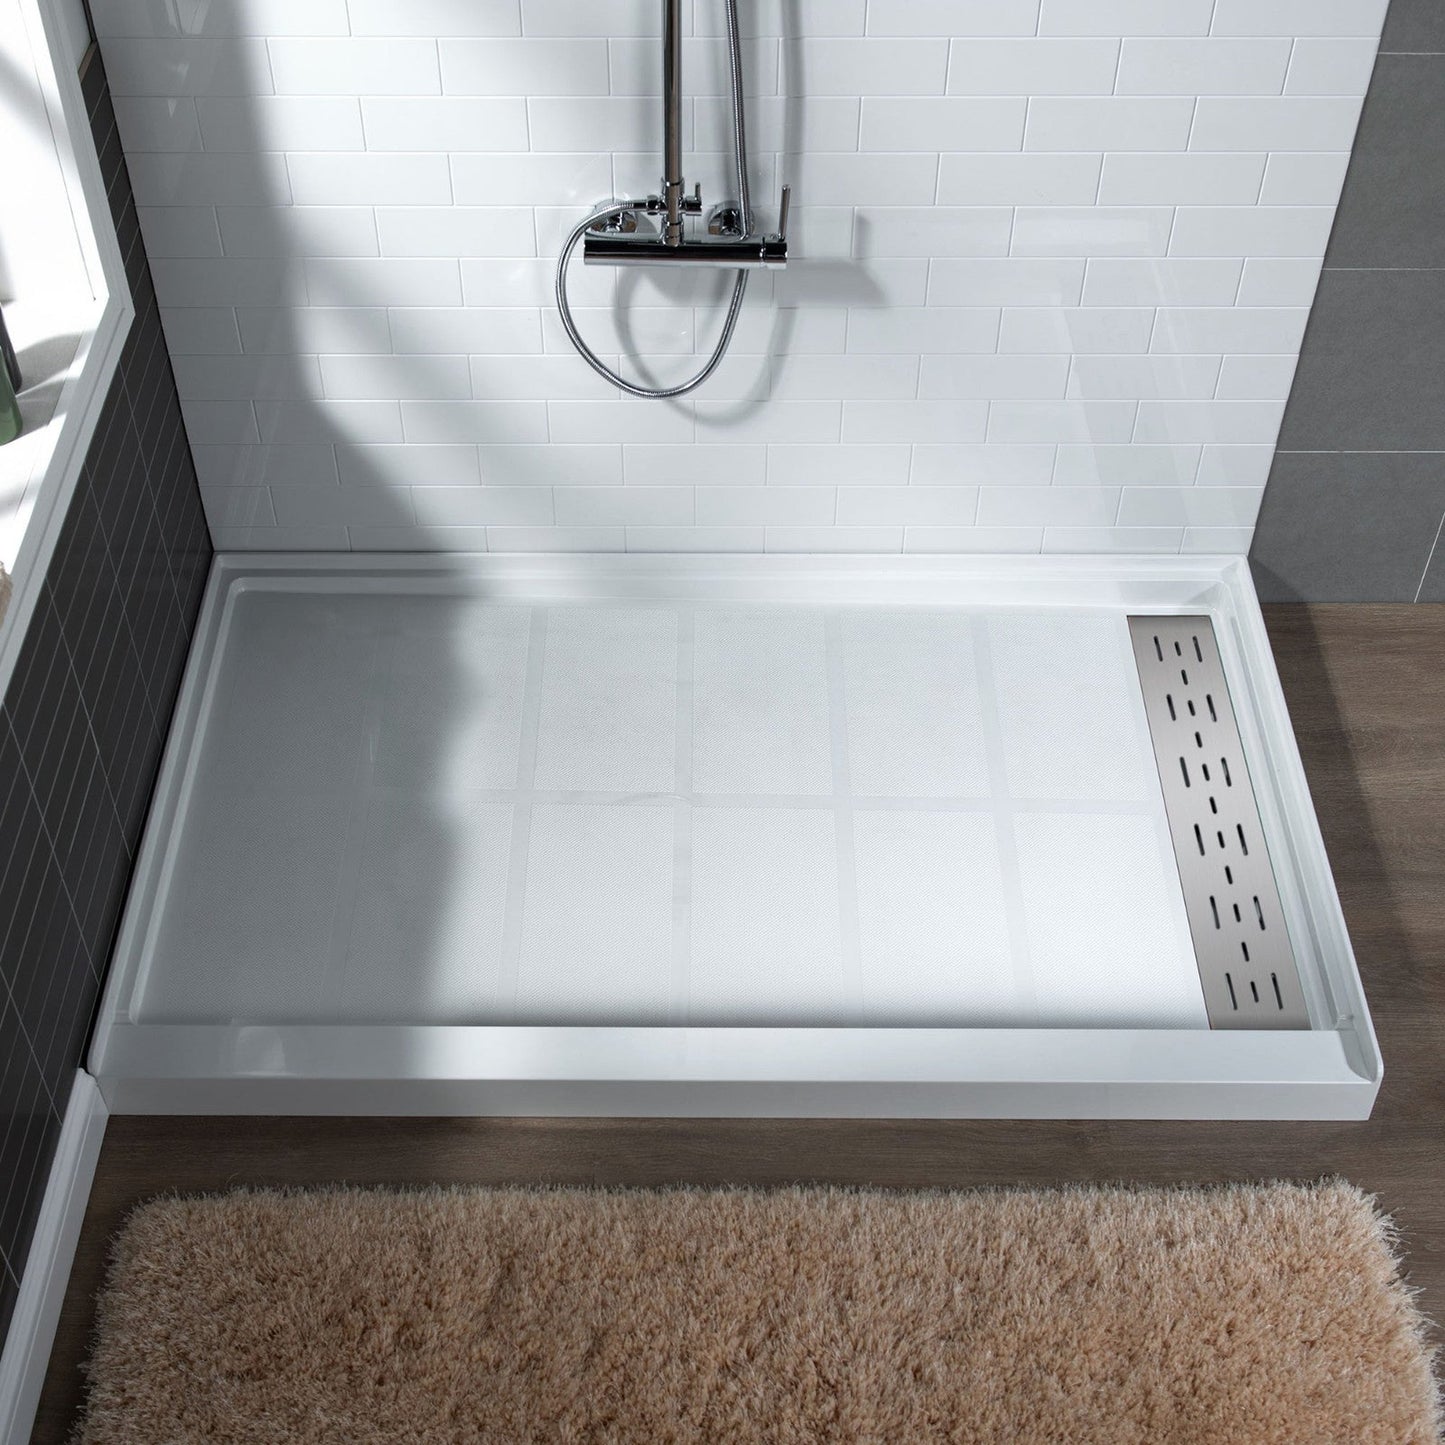 WoodBridge 60" x 34" White Solid Surface Shower Base Right Drain Location With Brushed Nickel Trench Drain Cover